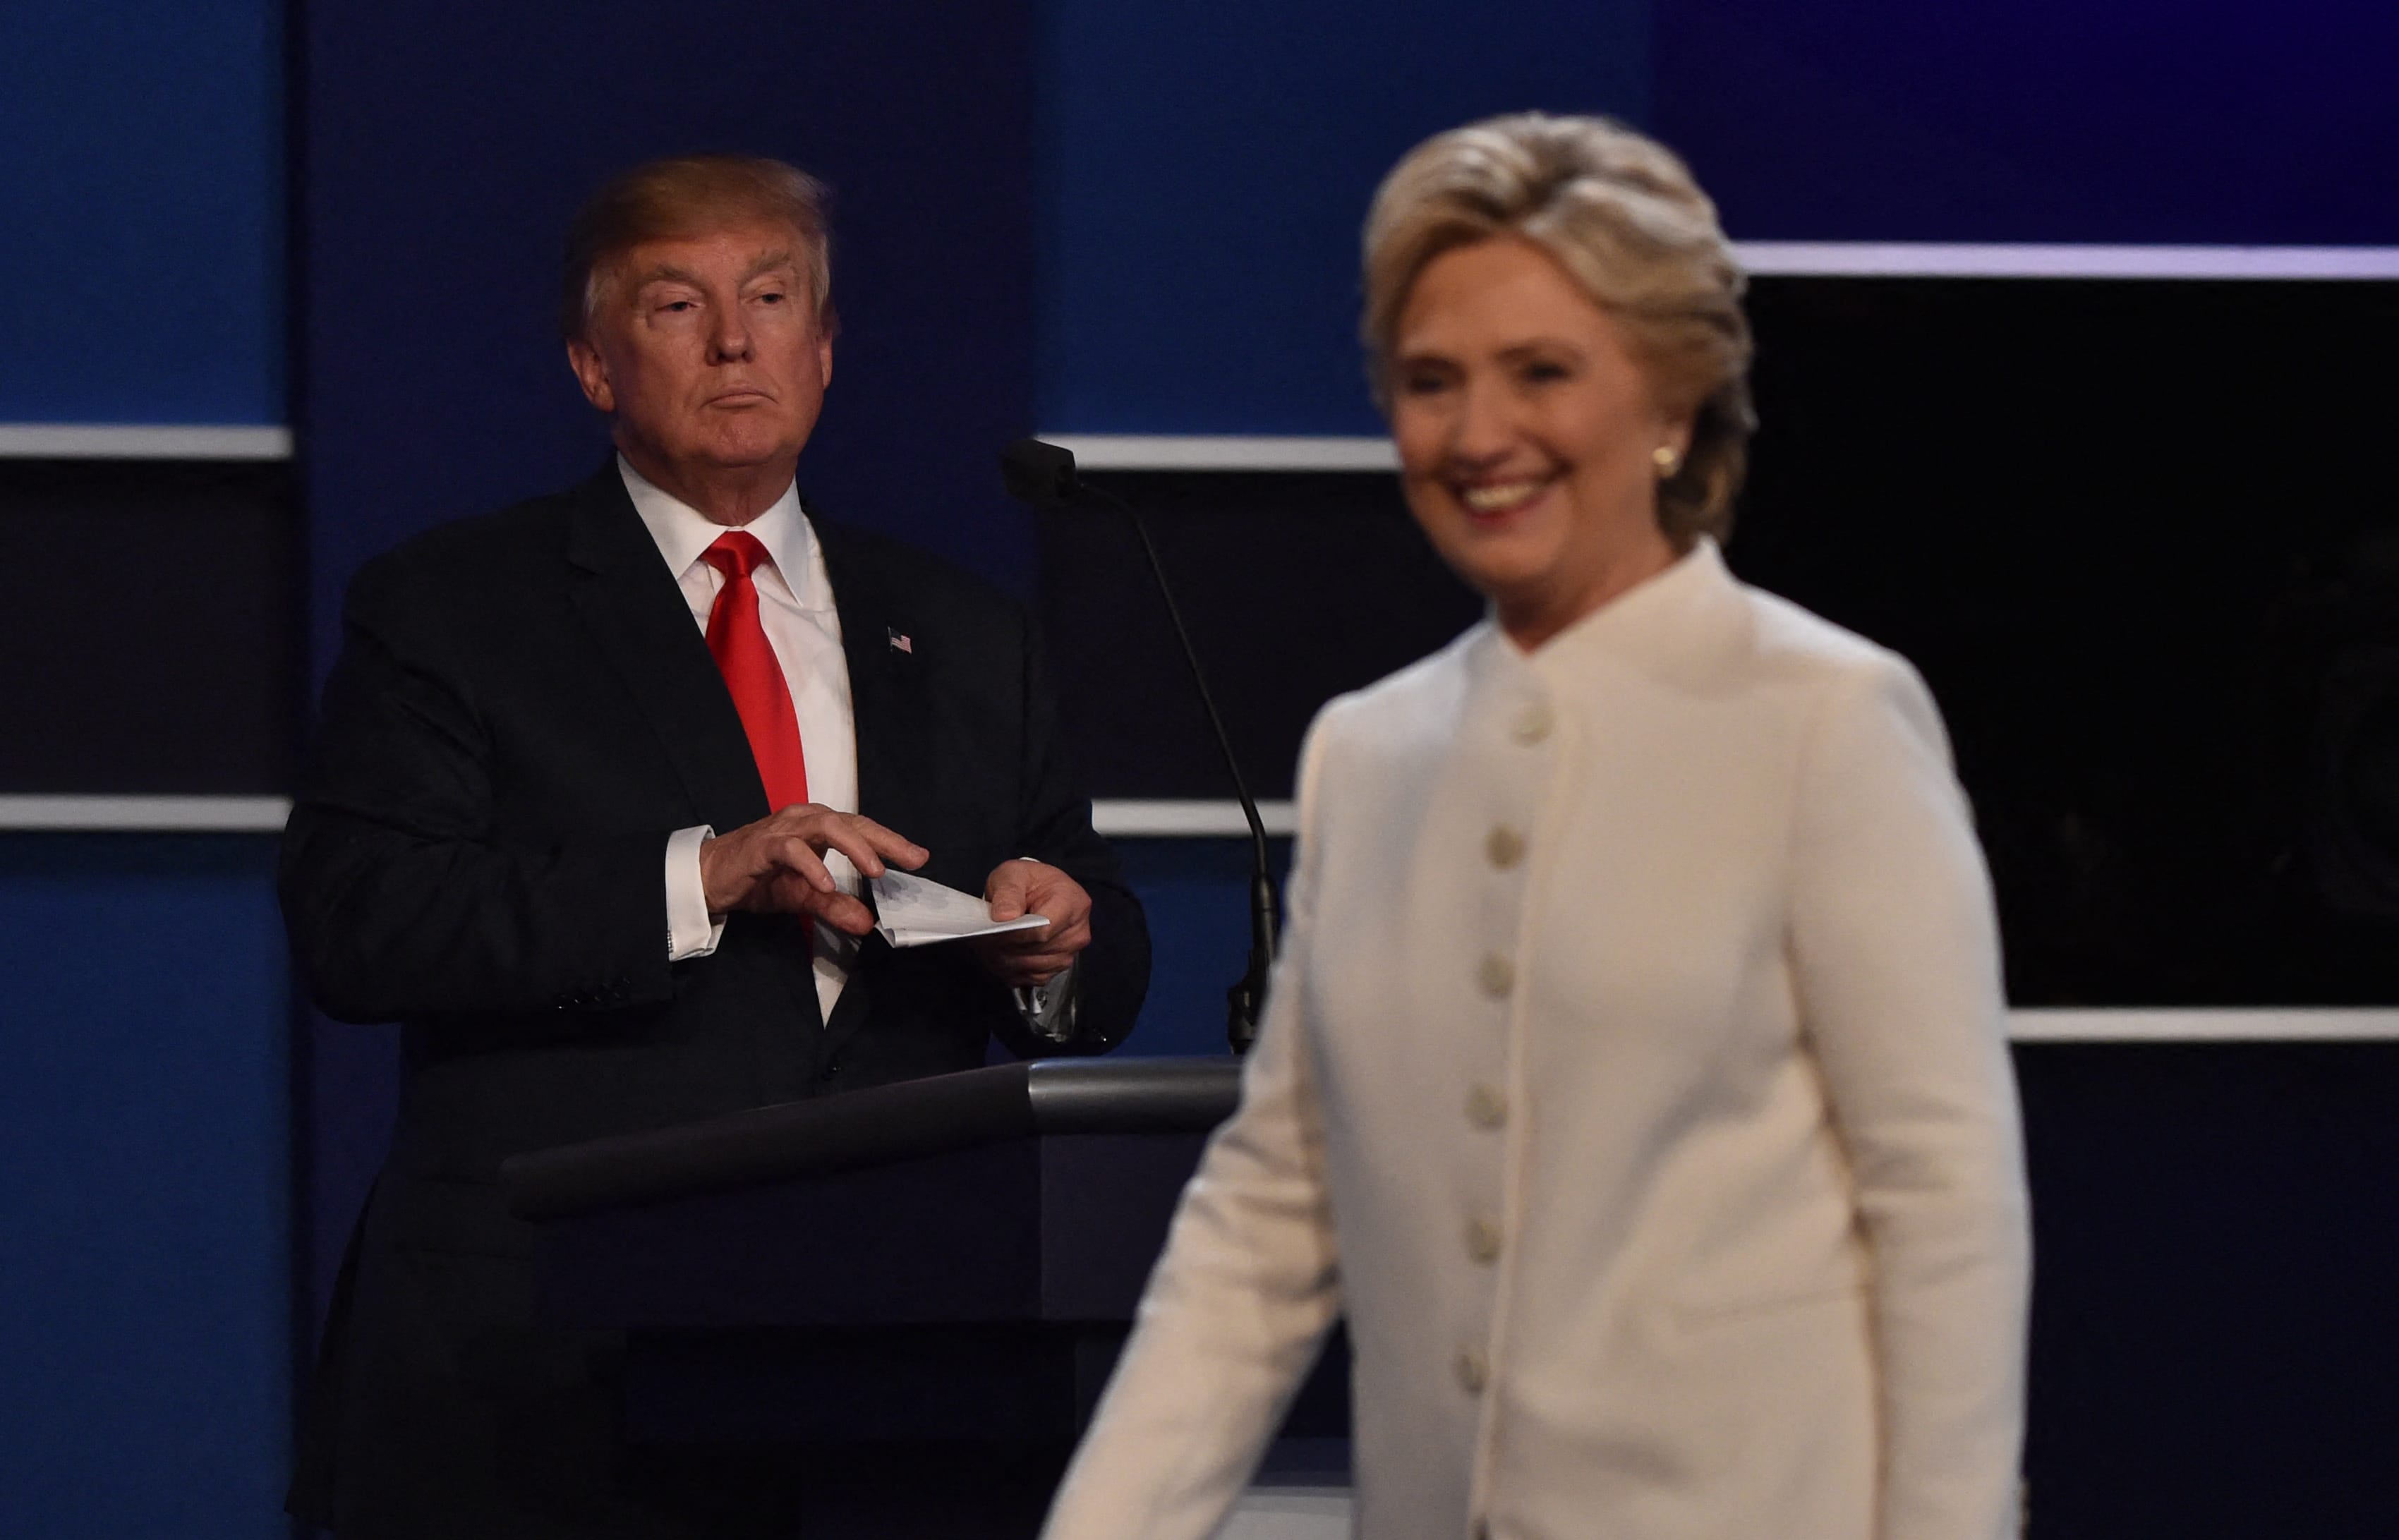 Hillary Clinton and Donald Trump during a presidential debate in Las Vegas, Nevada on 19 October 2016.